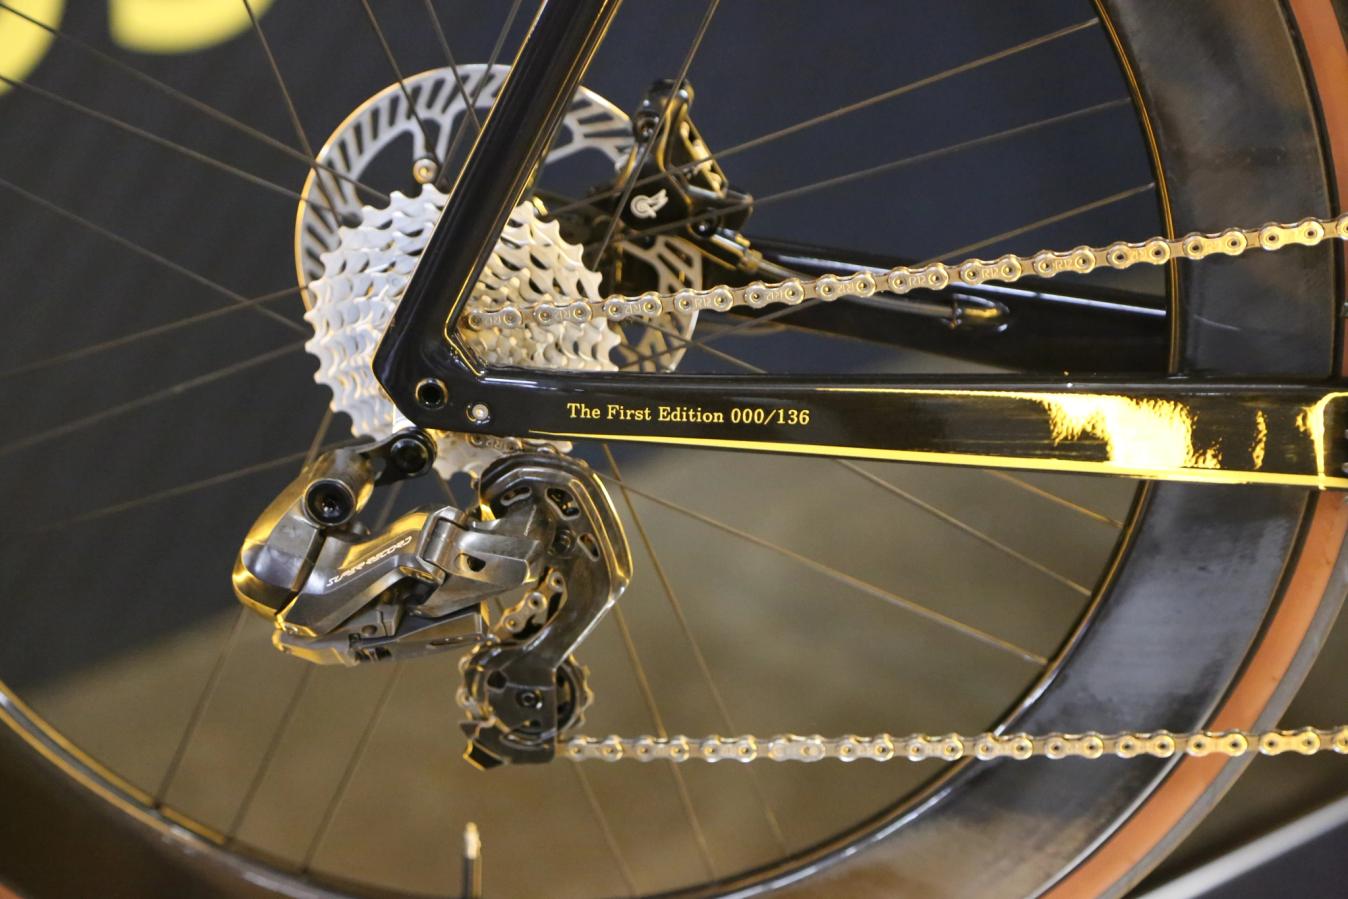 Only 136 of these Lotus Racing Edition bikes will be produced, each one numbered on the chainstay